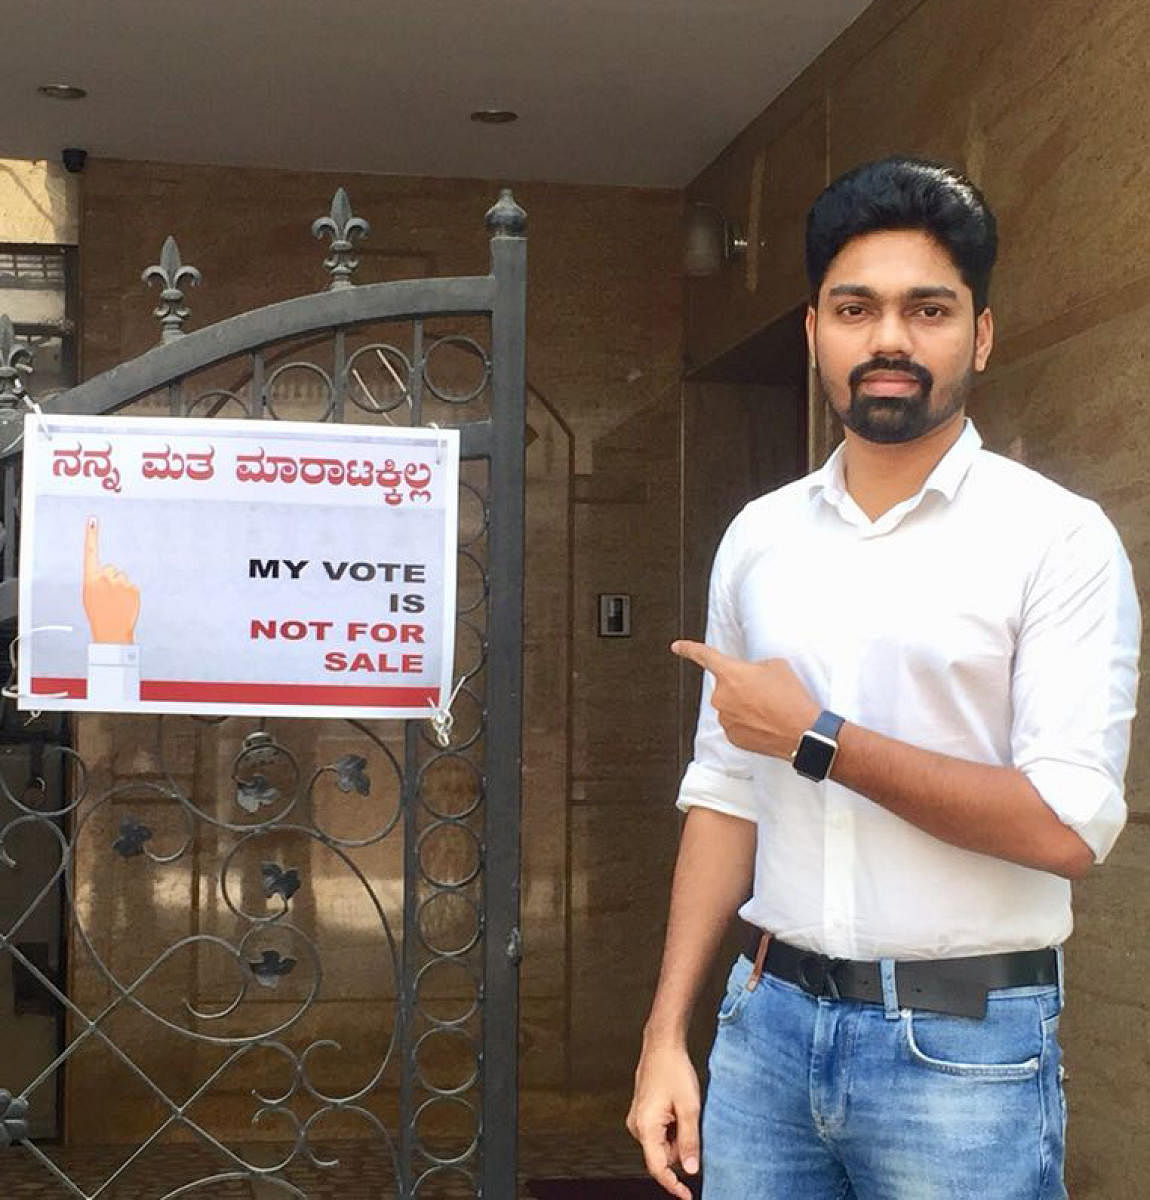 Anil Shetty shows the notice put up at the entrance of his house.